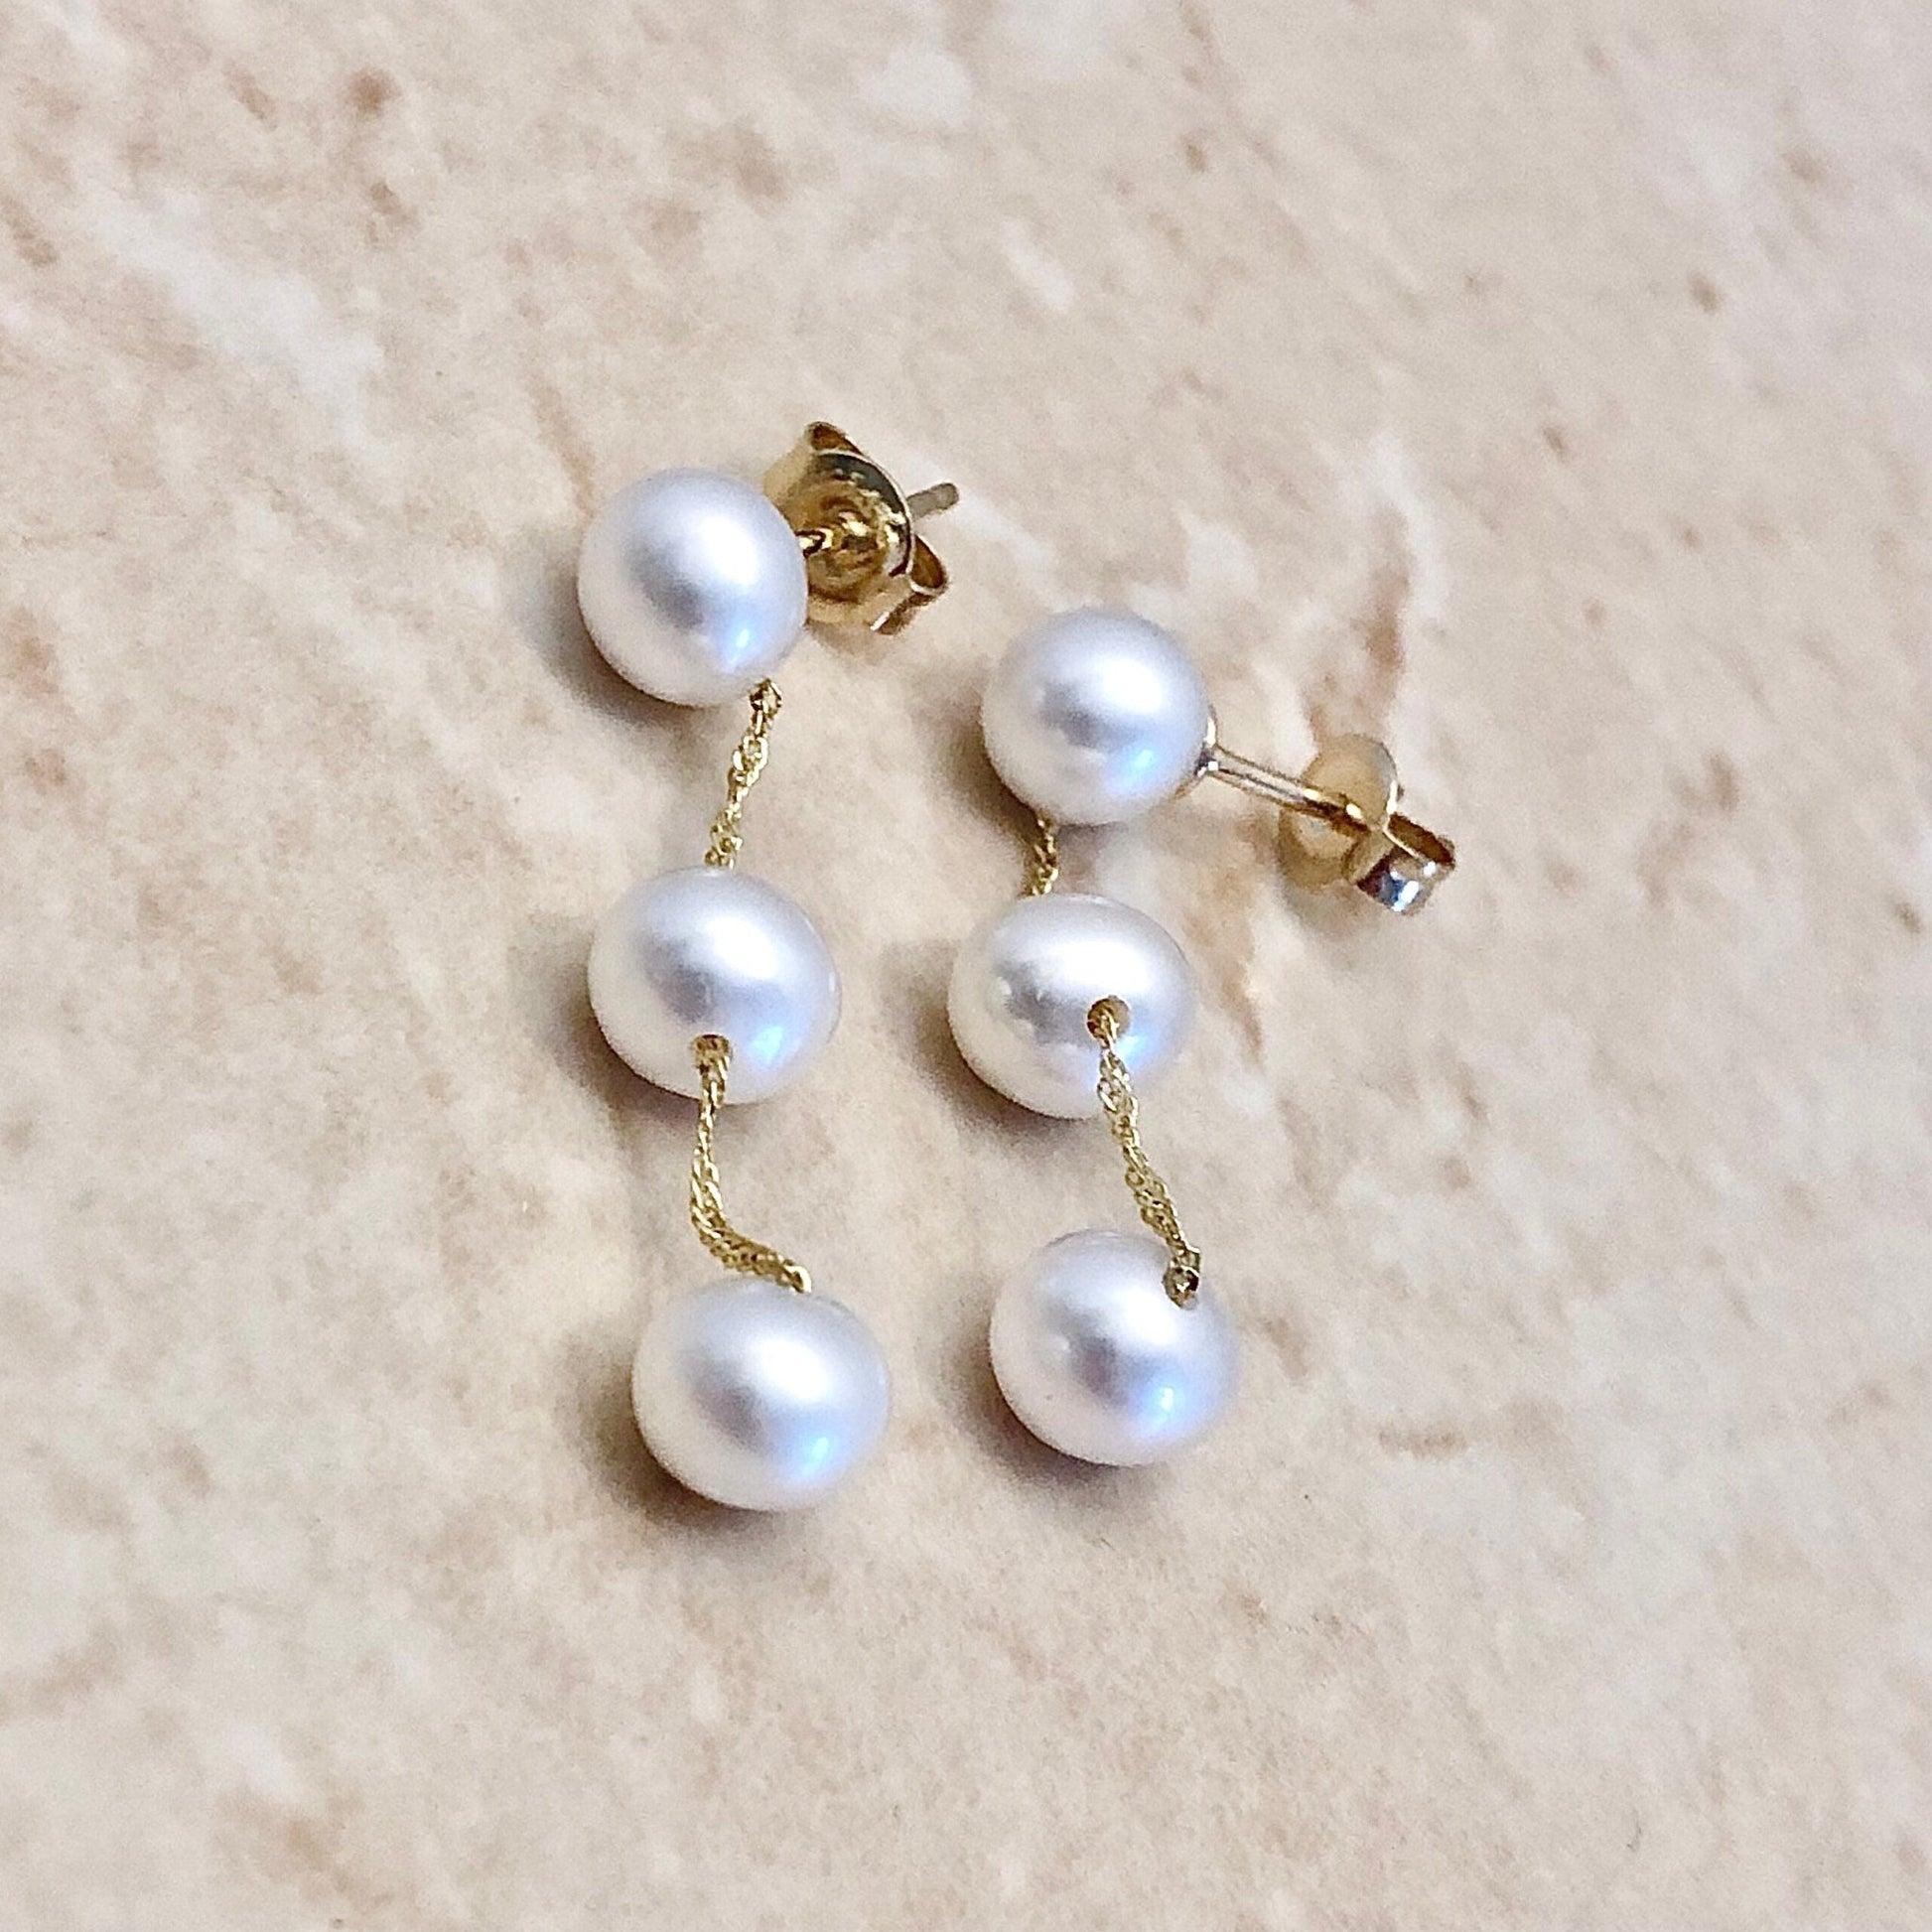 14K Tin Cup Pearl Drop Earrings - Yellow Gold Genuine Pearl Earrings - Birthday Gift - June Birthstone - Best Gift For Her - Jewelry Sale